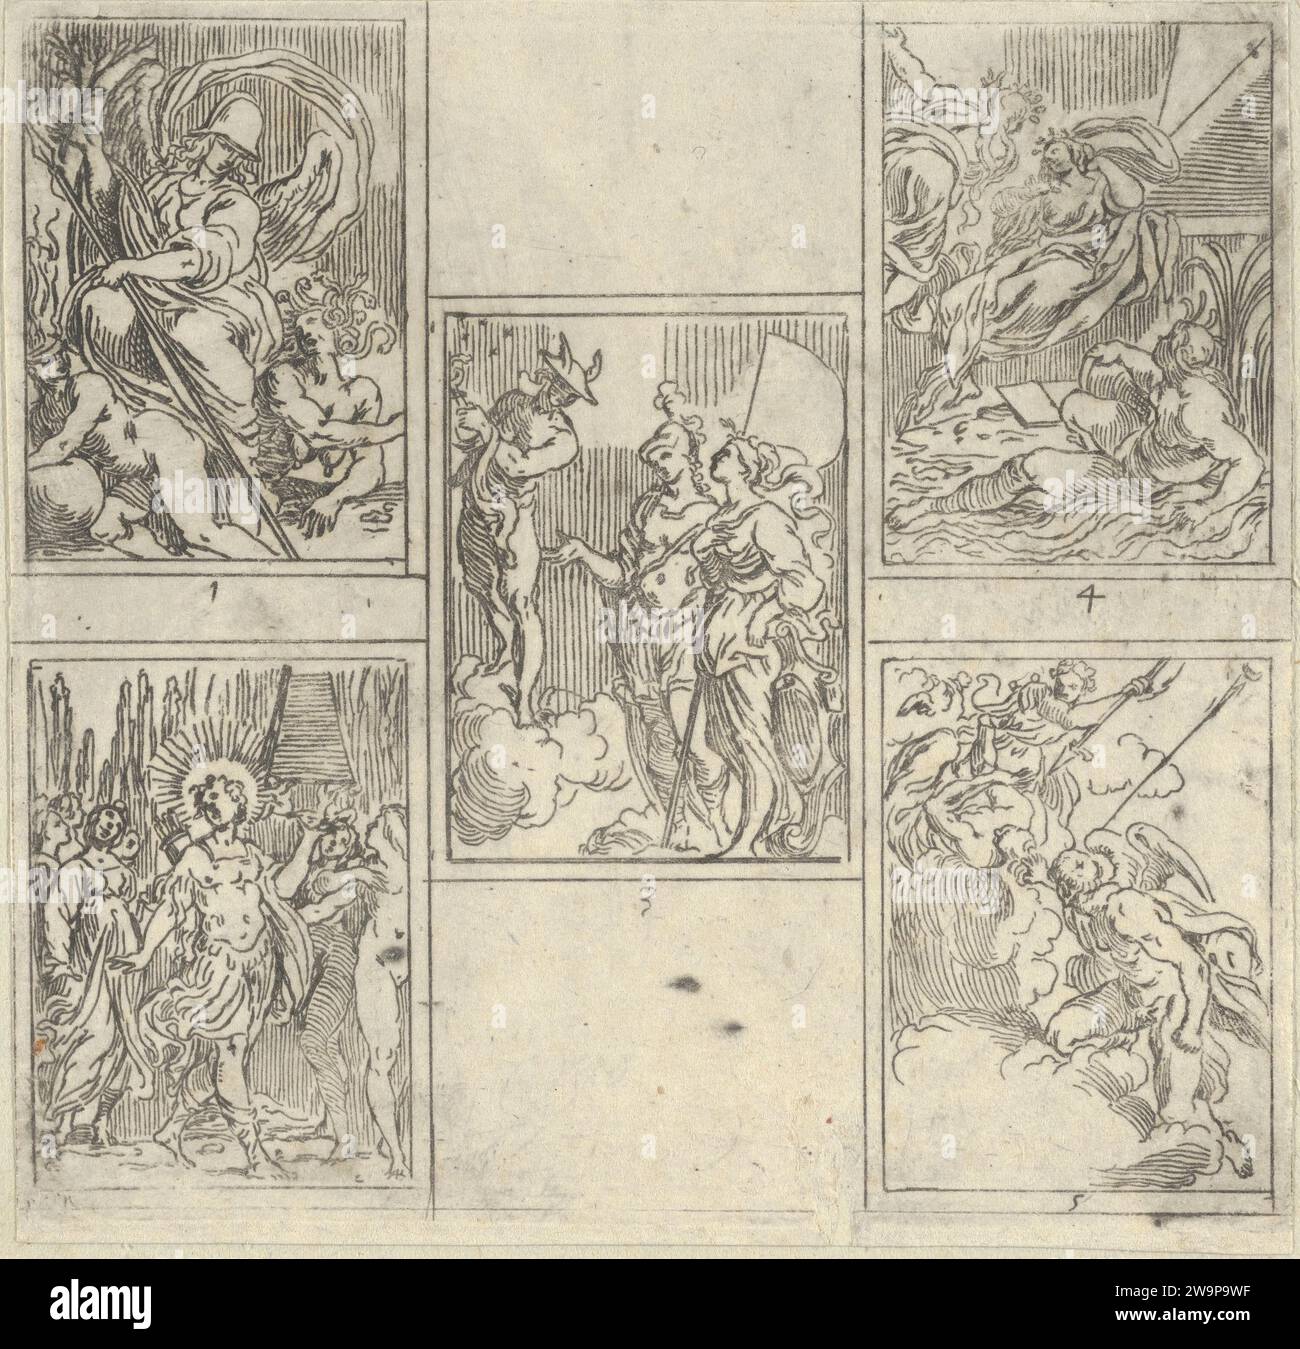 Five numbered scenes, each after a painter in the Accademia Degl'Incamminati, from IL FUNERALE D'AGOSTINO CARRACCIO FATTO IN BOLOGNA SUA PATRIA DAGL'INCAMINATI Academici del Disegno: 1. Virtue vanquishing Envy and Fortune, painted by Giulio Cesare Parigino; 2. Apollo and the Muses at the tomb of Agostino Carracci, painted by Luigi Valesio; 3. Mercury pointing to a constellation with the personification of Painting and that of the city of Bologna, Felsina, painted by Aurelio Benelli; 4. Personification of Painting being comforted by Poetry, and the personification of a river at right, painted b Stock Photo